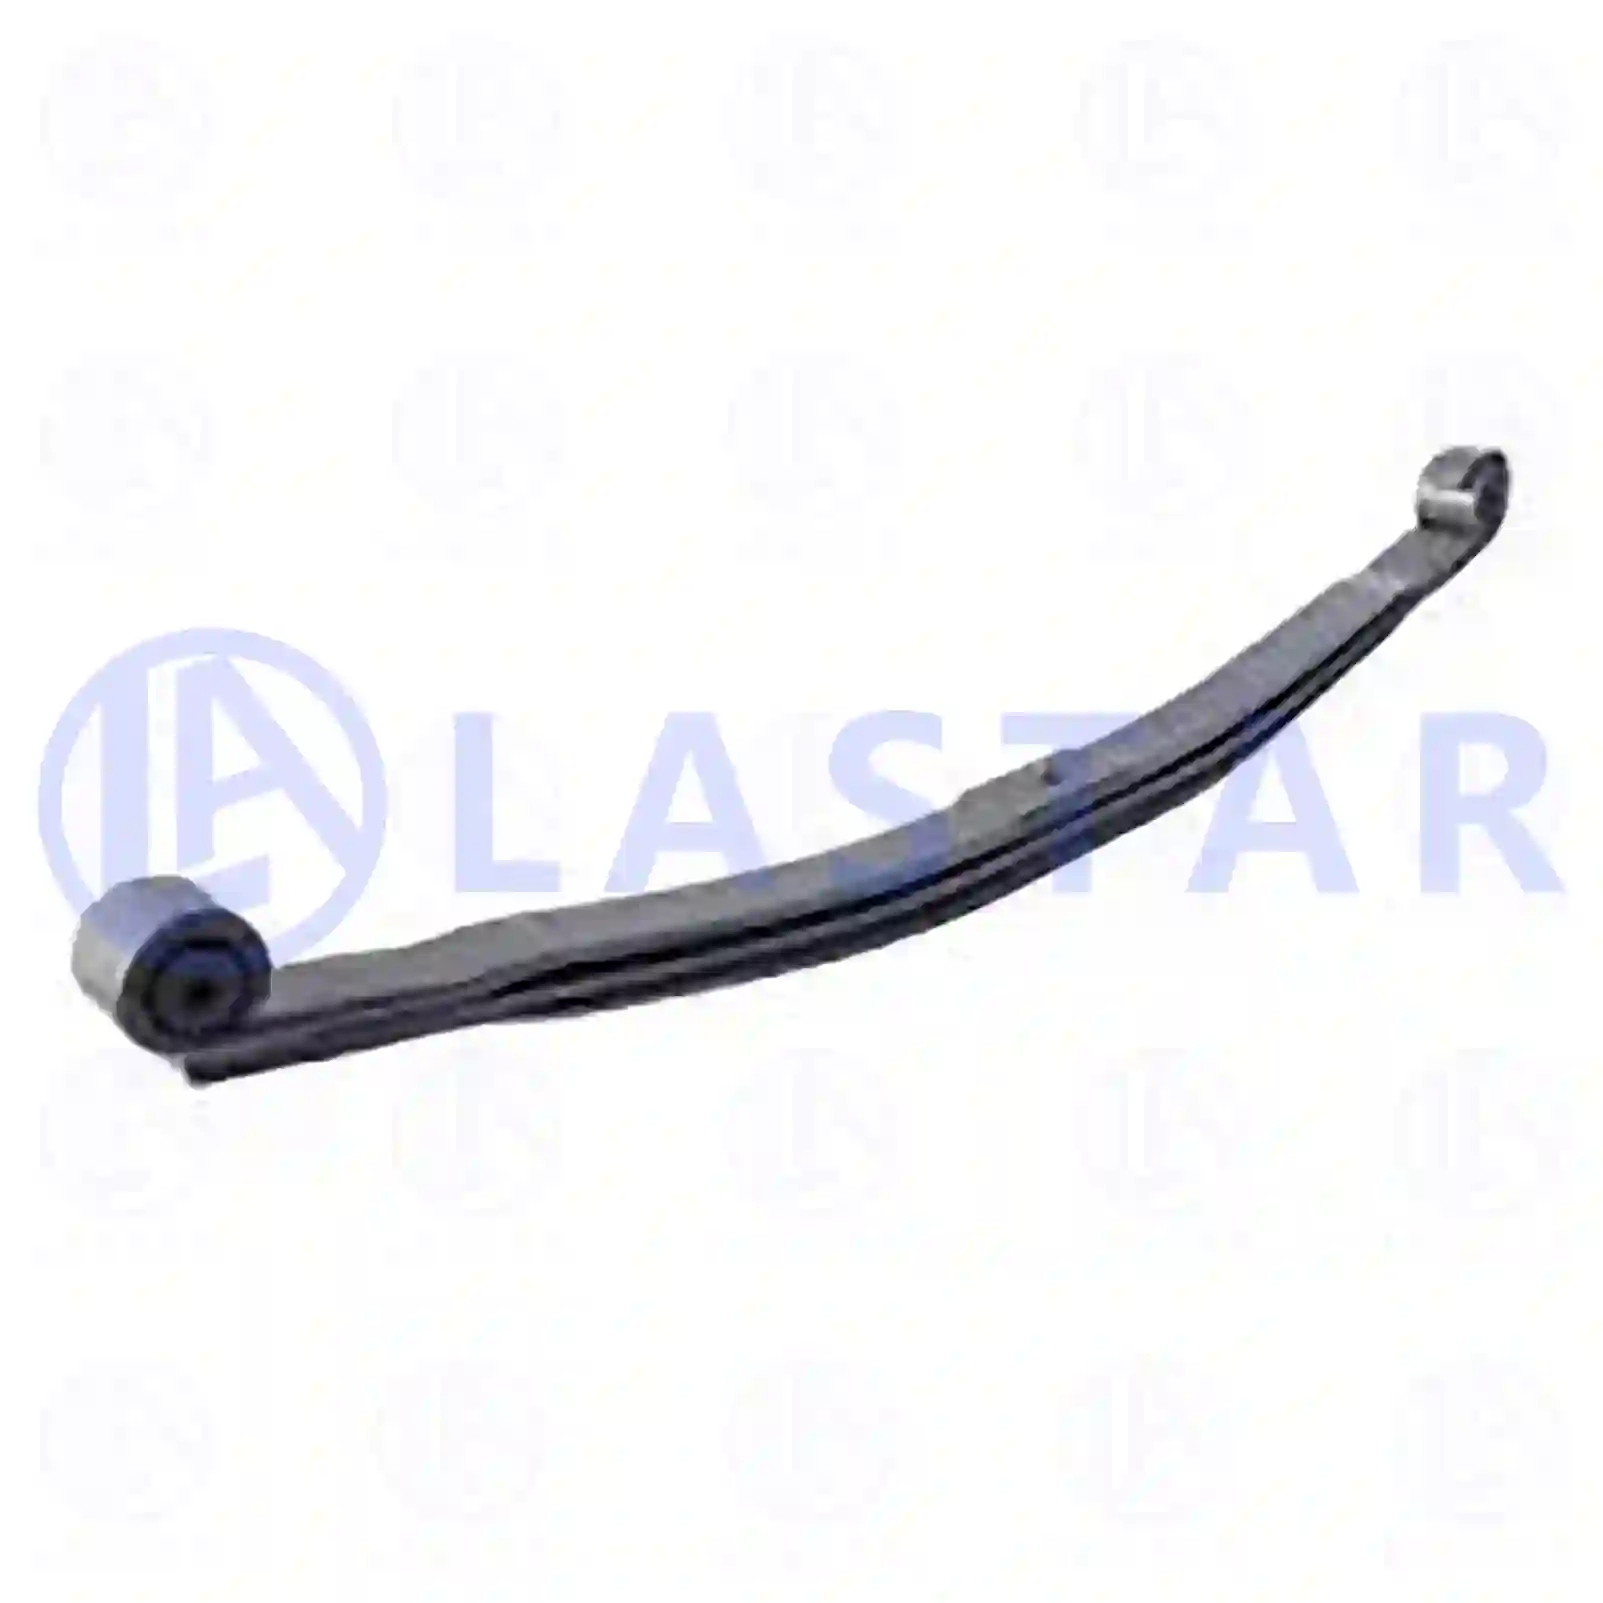 Leaf spring, front, 77728097, 9743202402, 97432 ||  77728097 Lastar Spare Part | Truck Spare Parts, Auotomotive Spare Parts Leaf spring, front, 77728097, 9743202402, 97432 ||  77728097 Lastar Spare Part | Truck Spare Parts, Auotomotive Spare Parts